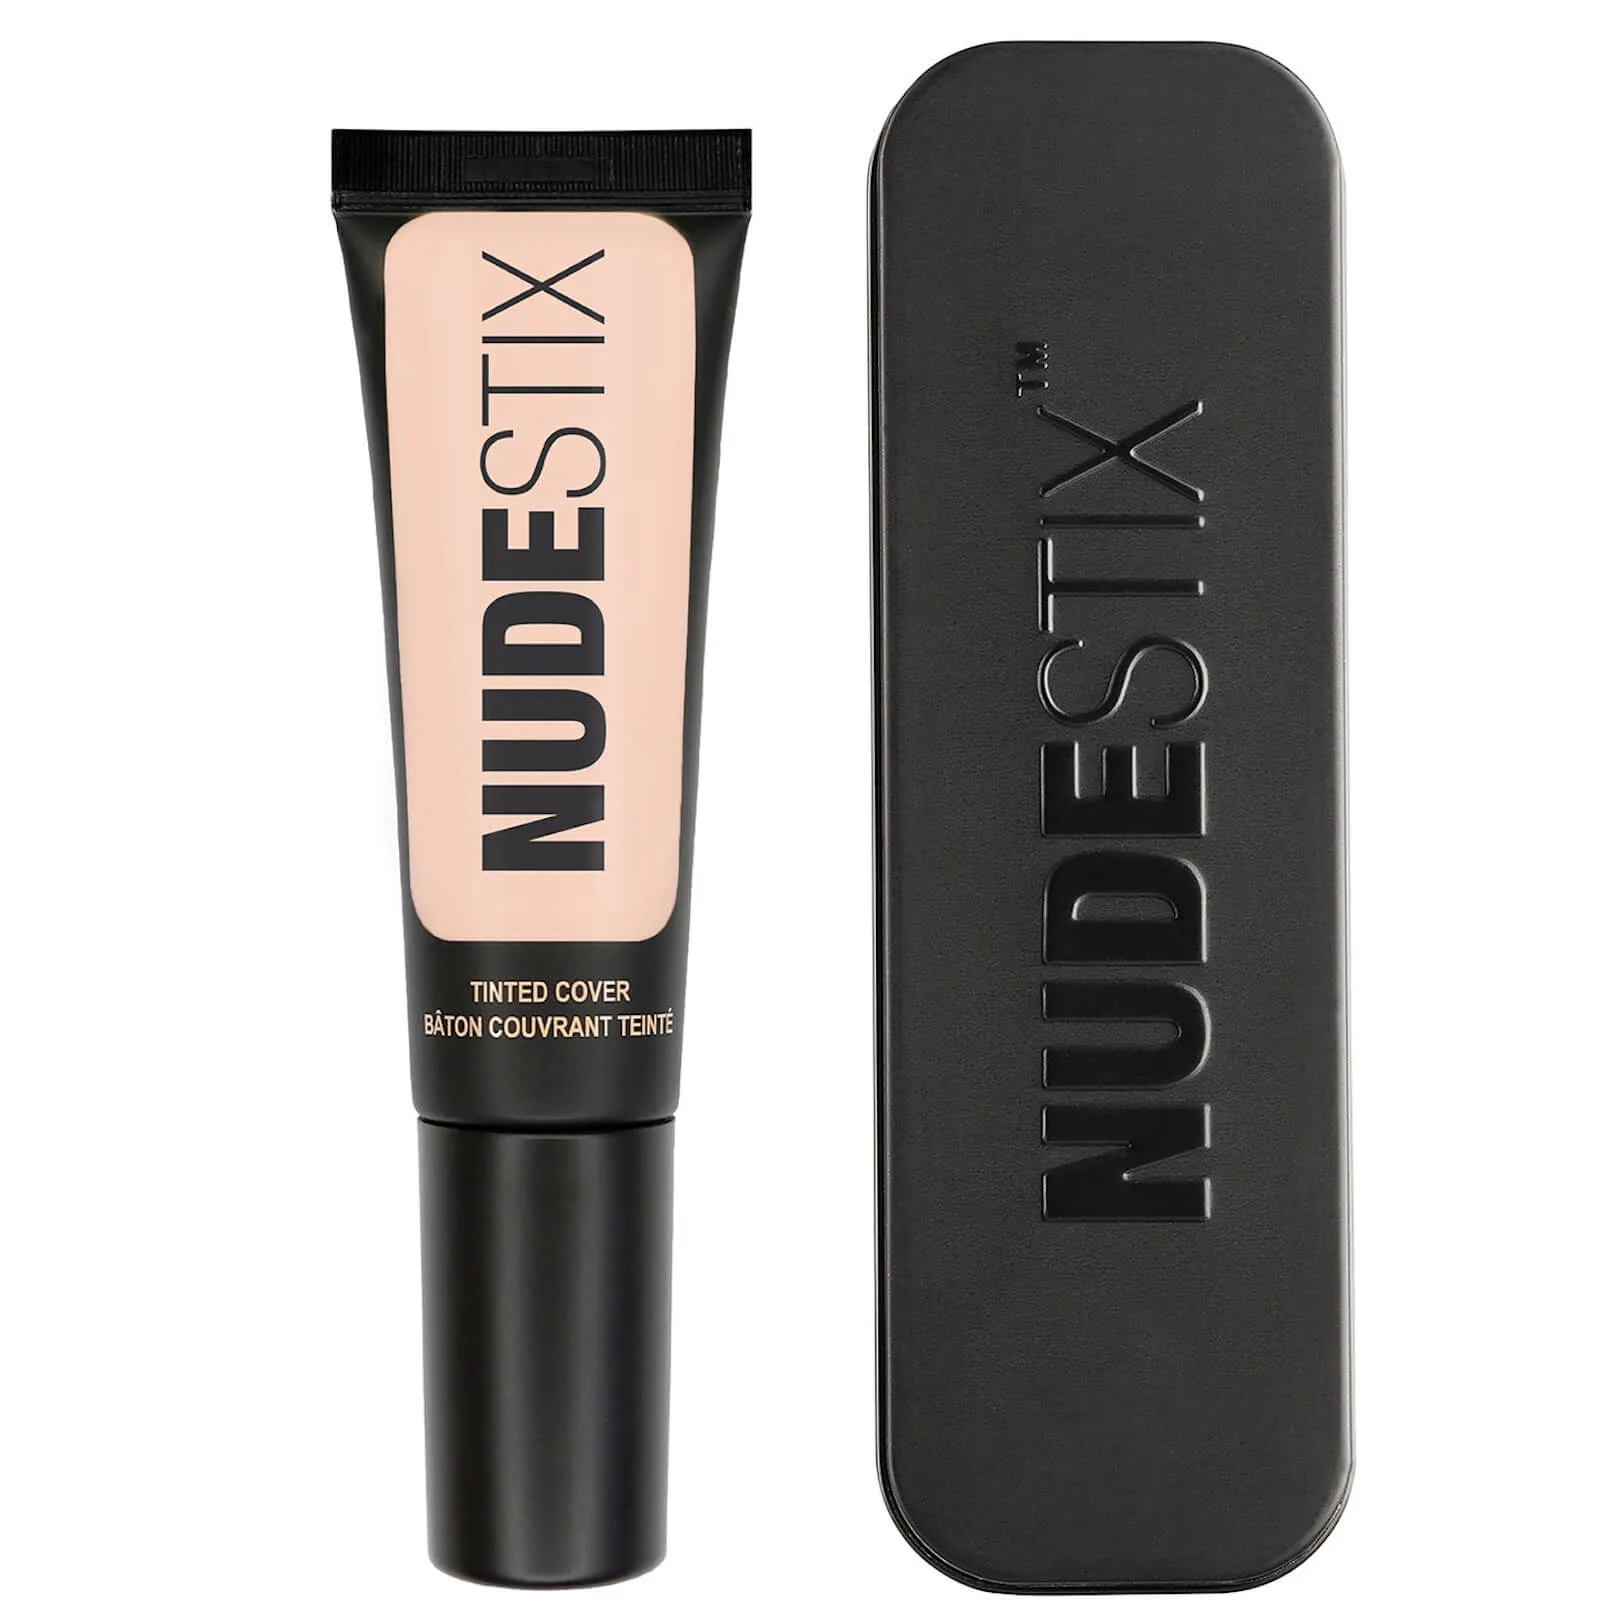  Tinted Cover Foundation (Various Shades) - Nude 1